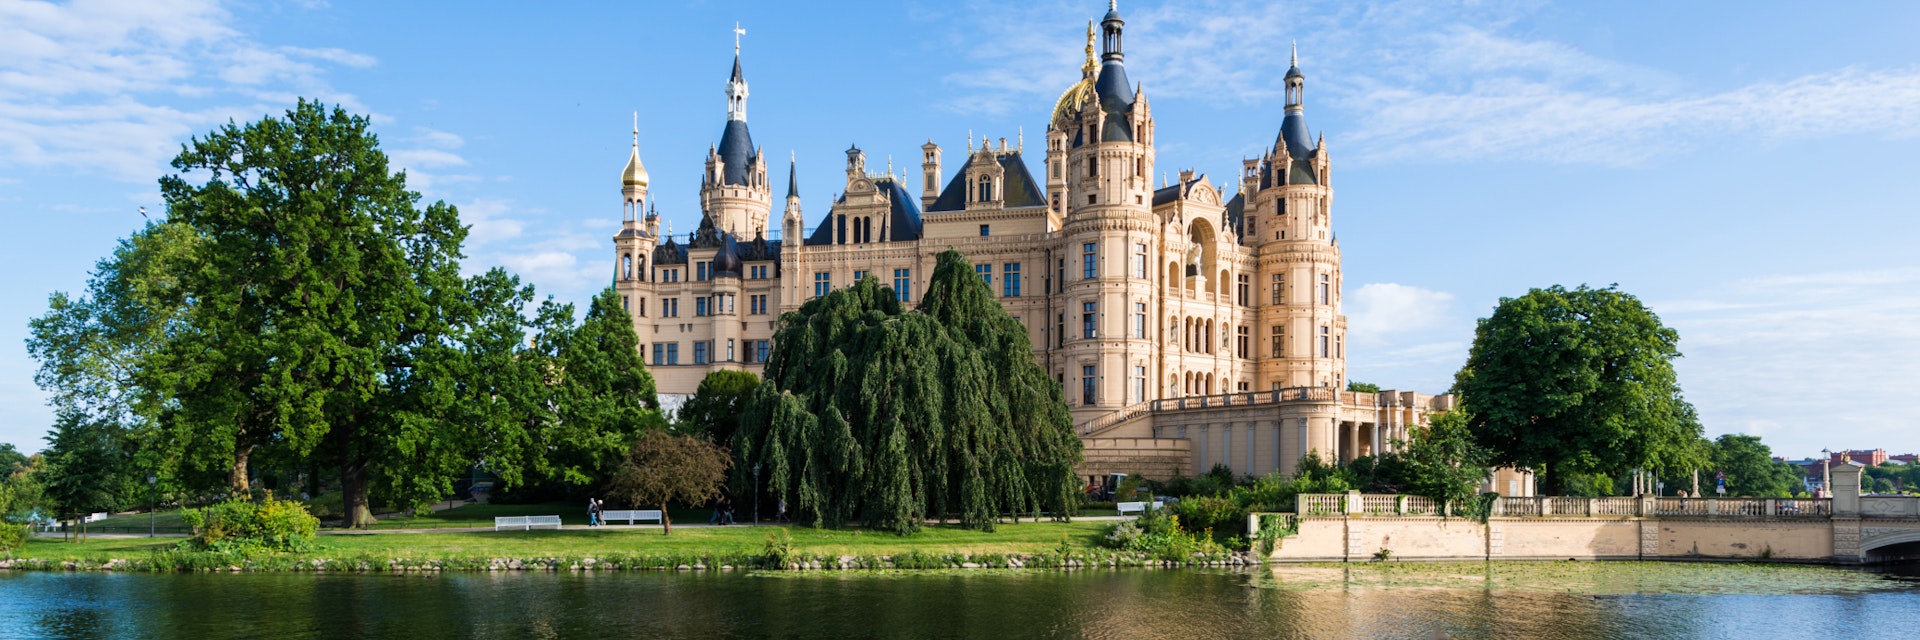 Schwerin Castle, Schwerin, Germany; Shutterstock ID 418483972; Your name (First / Last): Gemma Graham; GL account no.: 65050; Netsuite department name: Online Editorial; Full Product or Project name including edition: Northern Germany destination page